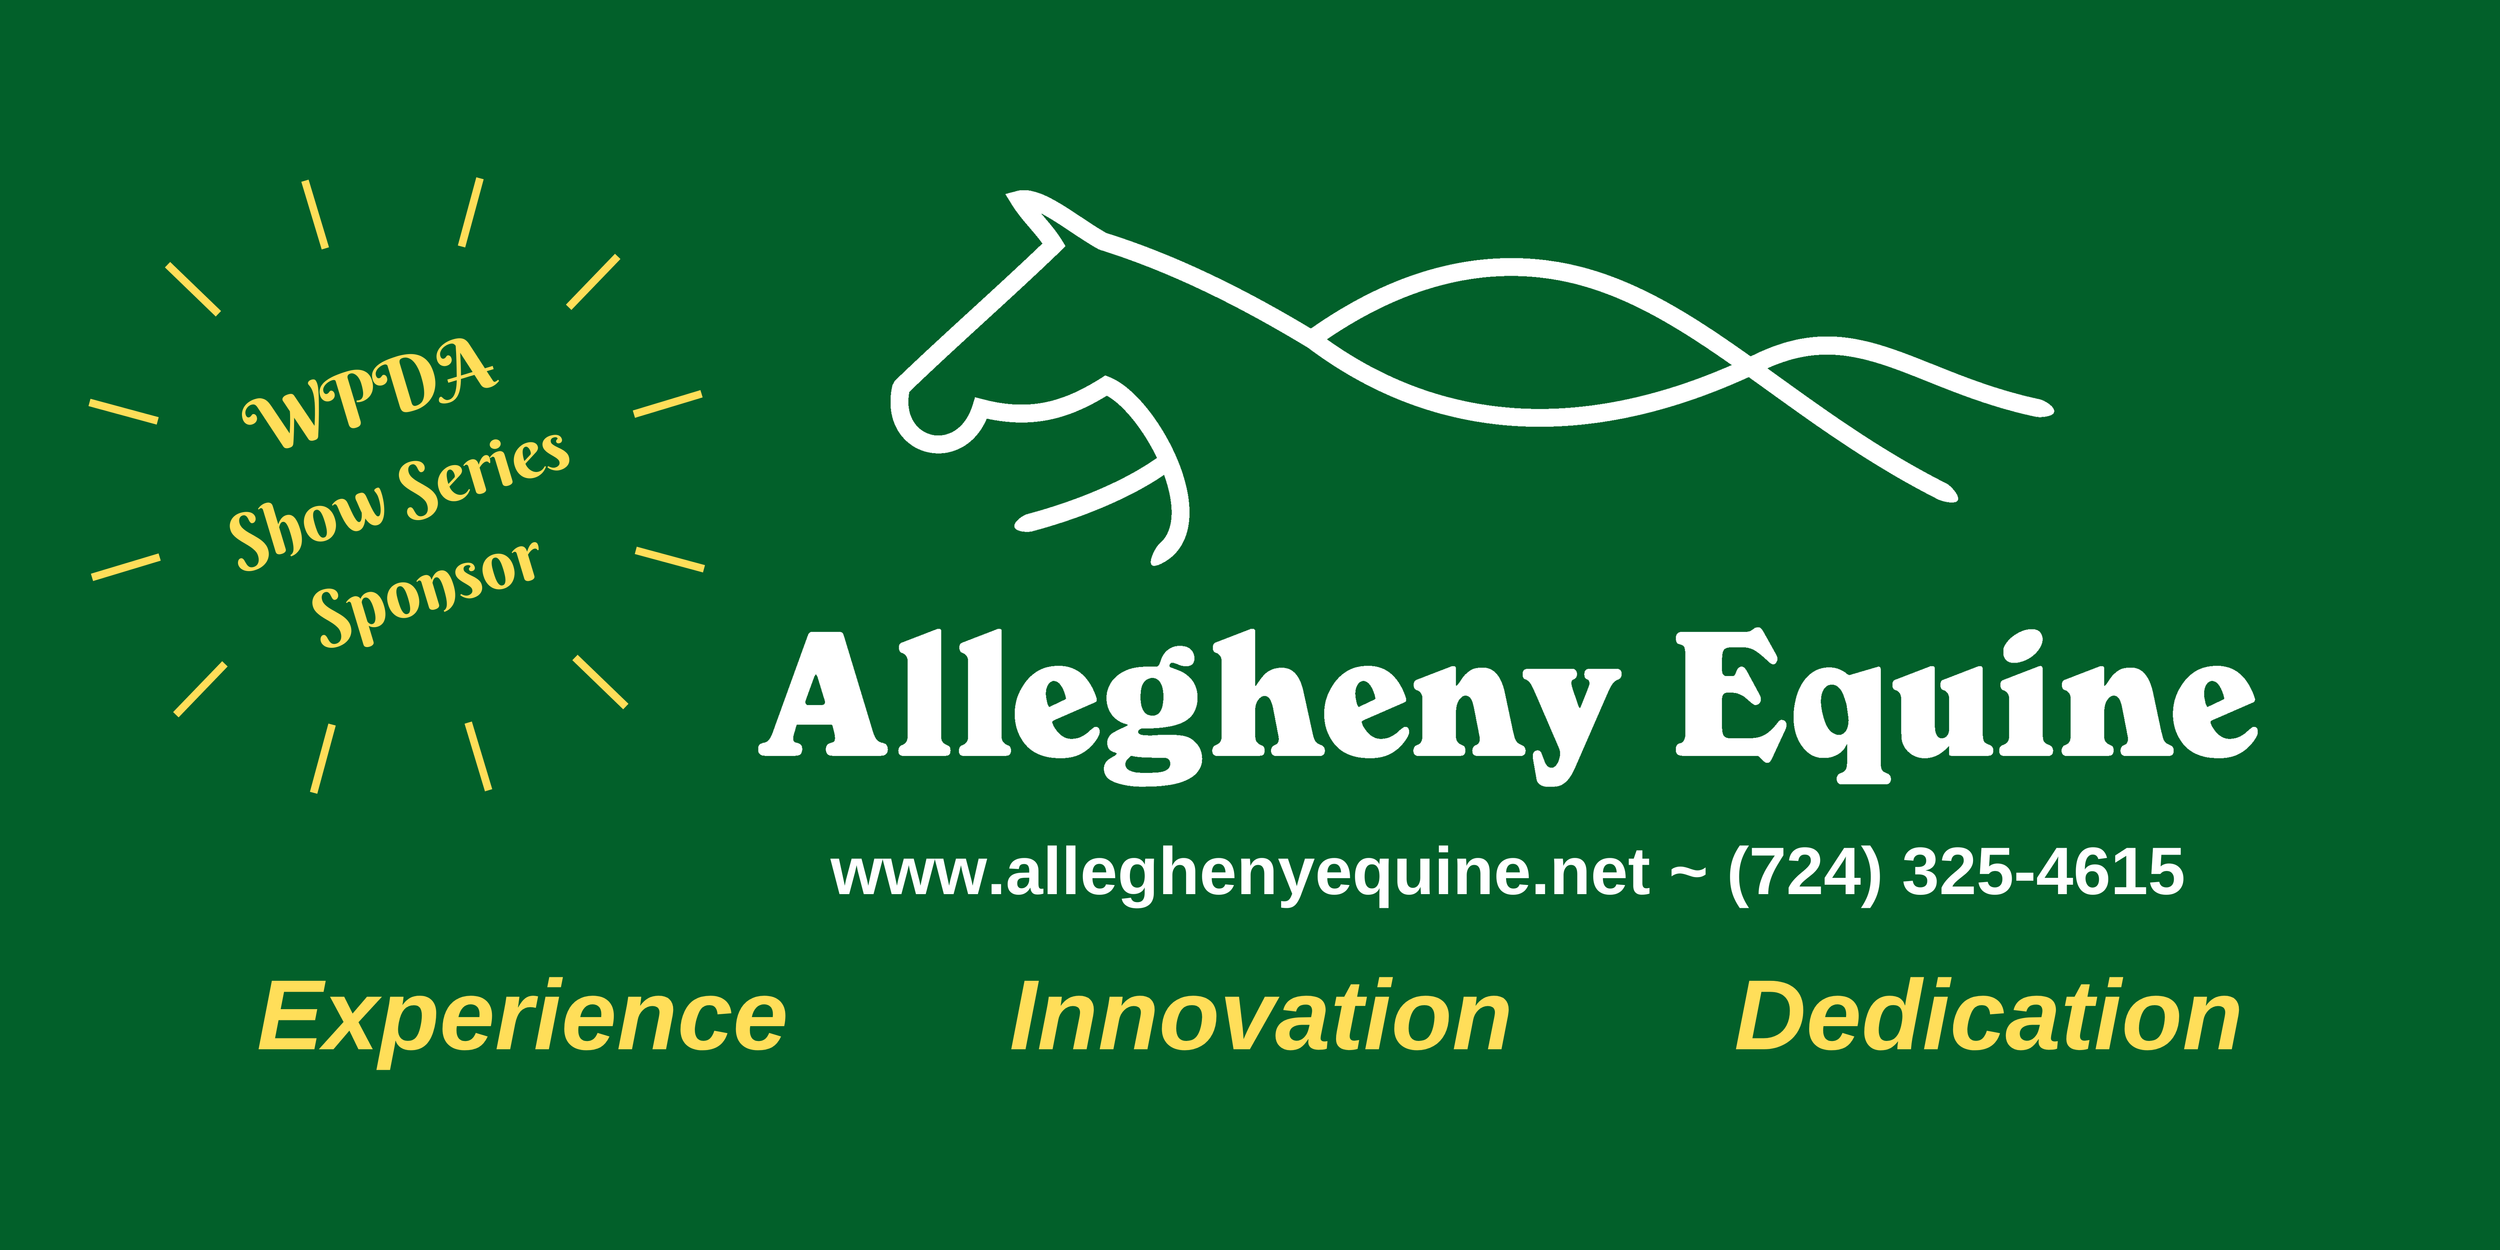 Copy of Allegheny Equine Banner.png